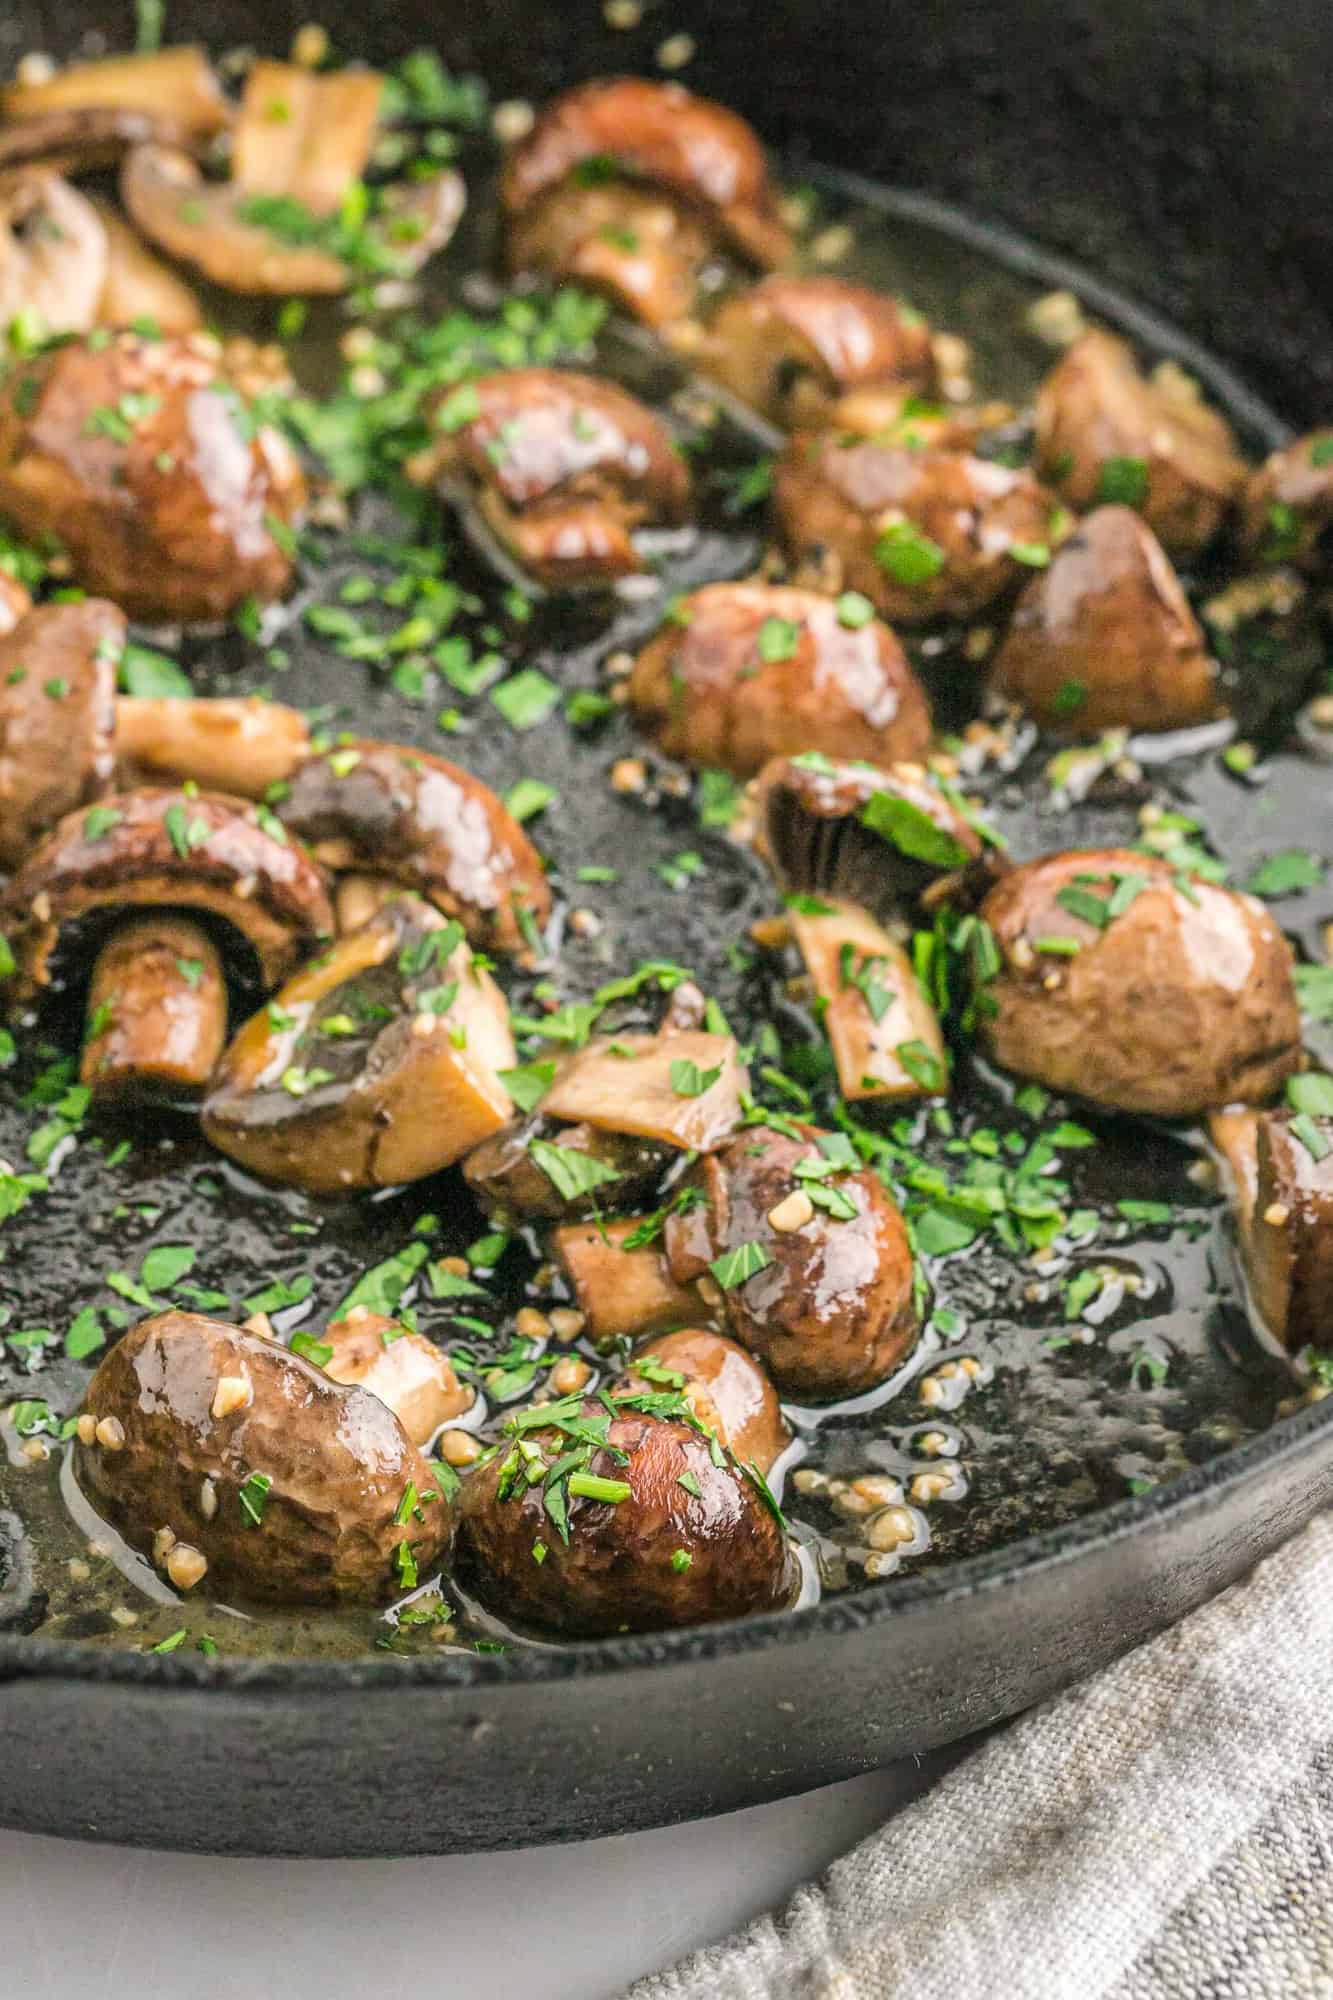 Cooked mushrooms swimming in garlic and parsley.